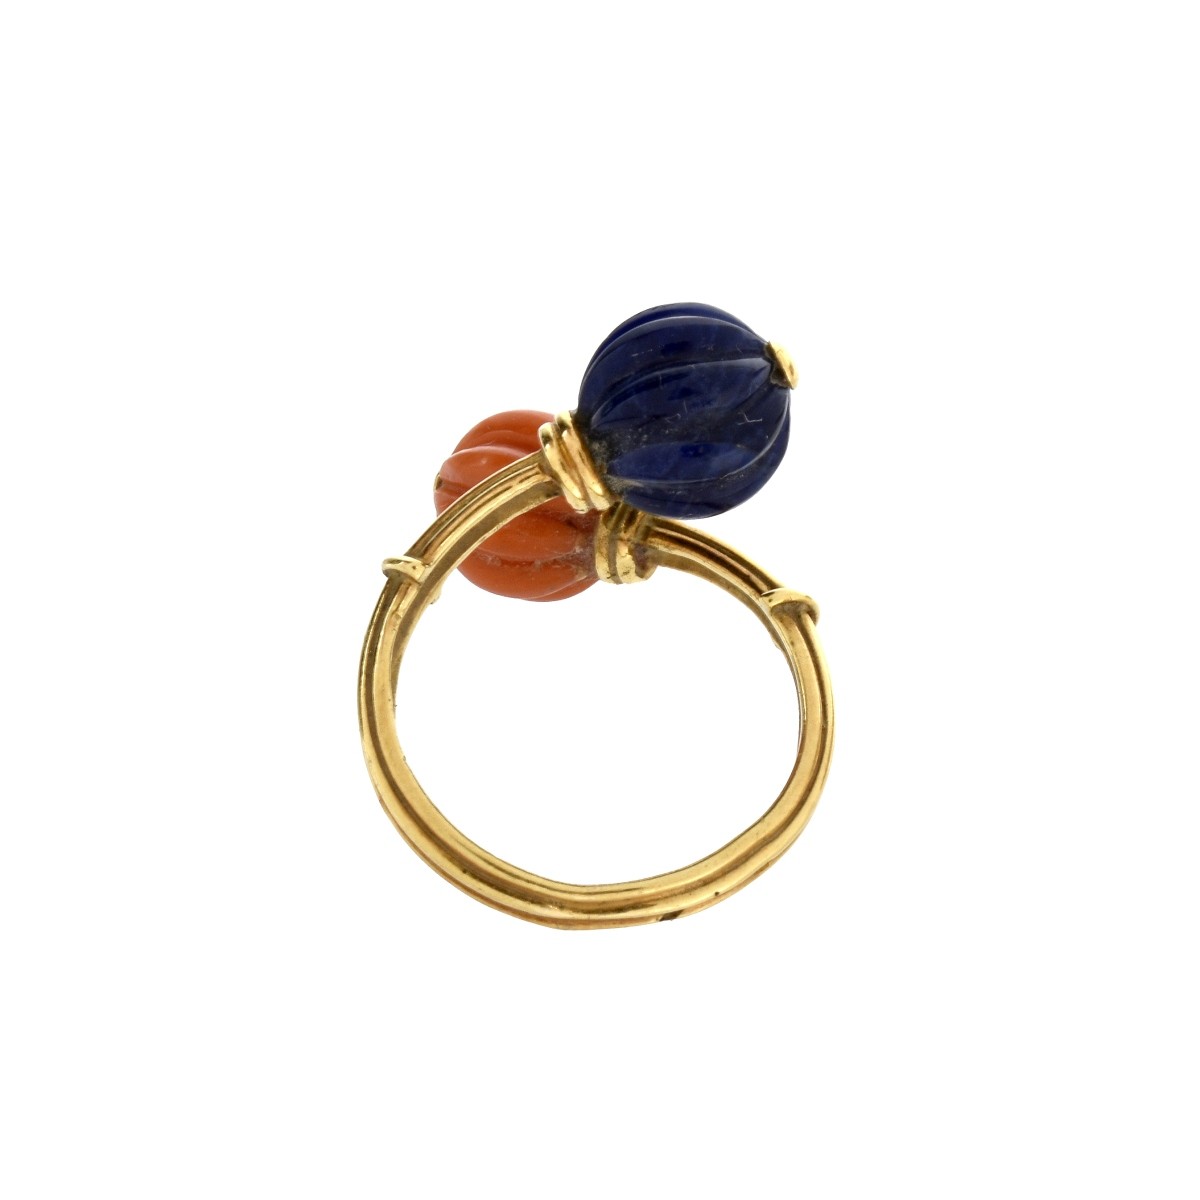 Spitzer & Furman Coral, Lapis and 18K Ring